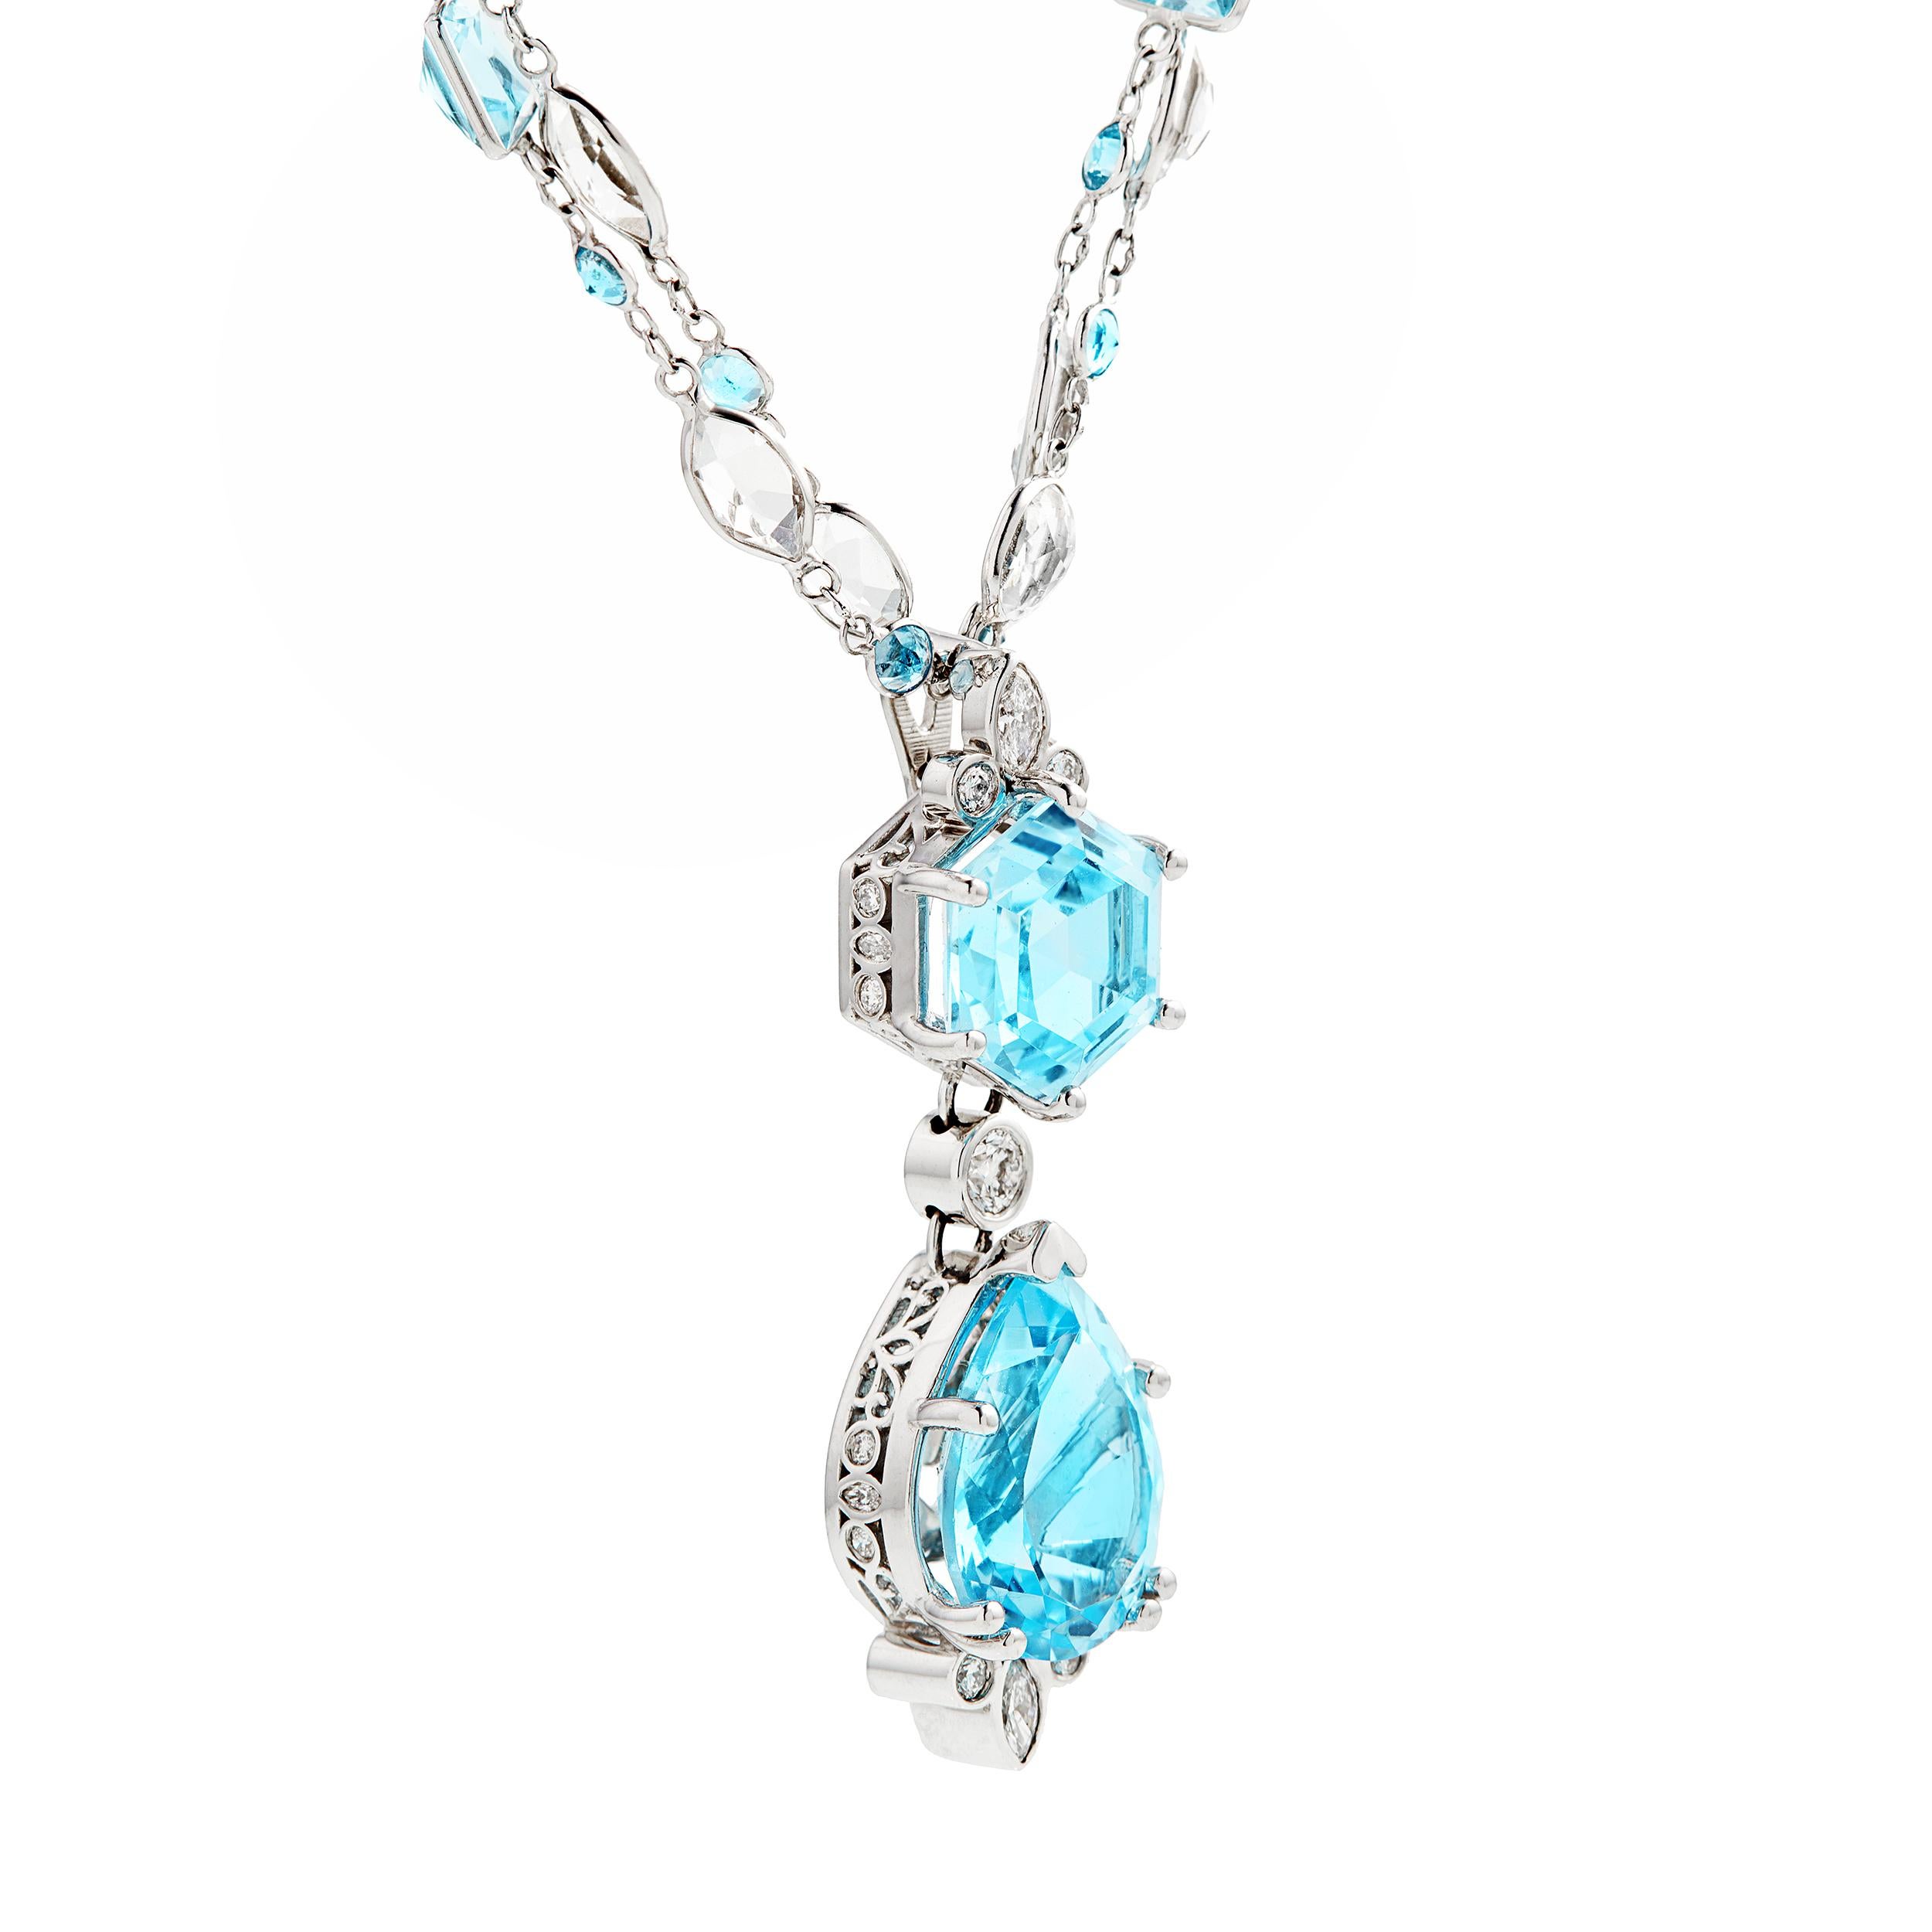 This necklace invokes the color of a bright clear blue sky. It's cheerful and beautiful with Fancy-shaped Blue Topaz throughout this one of a kind design. Notice the detail in the side of the pendant mounting, which also features an enhancer to